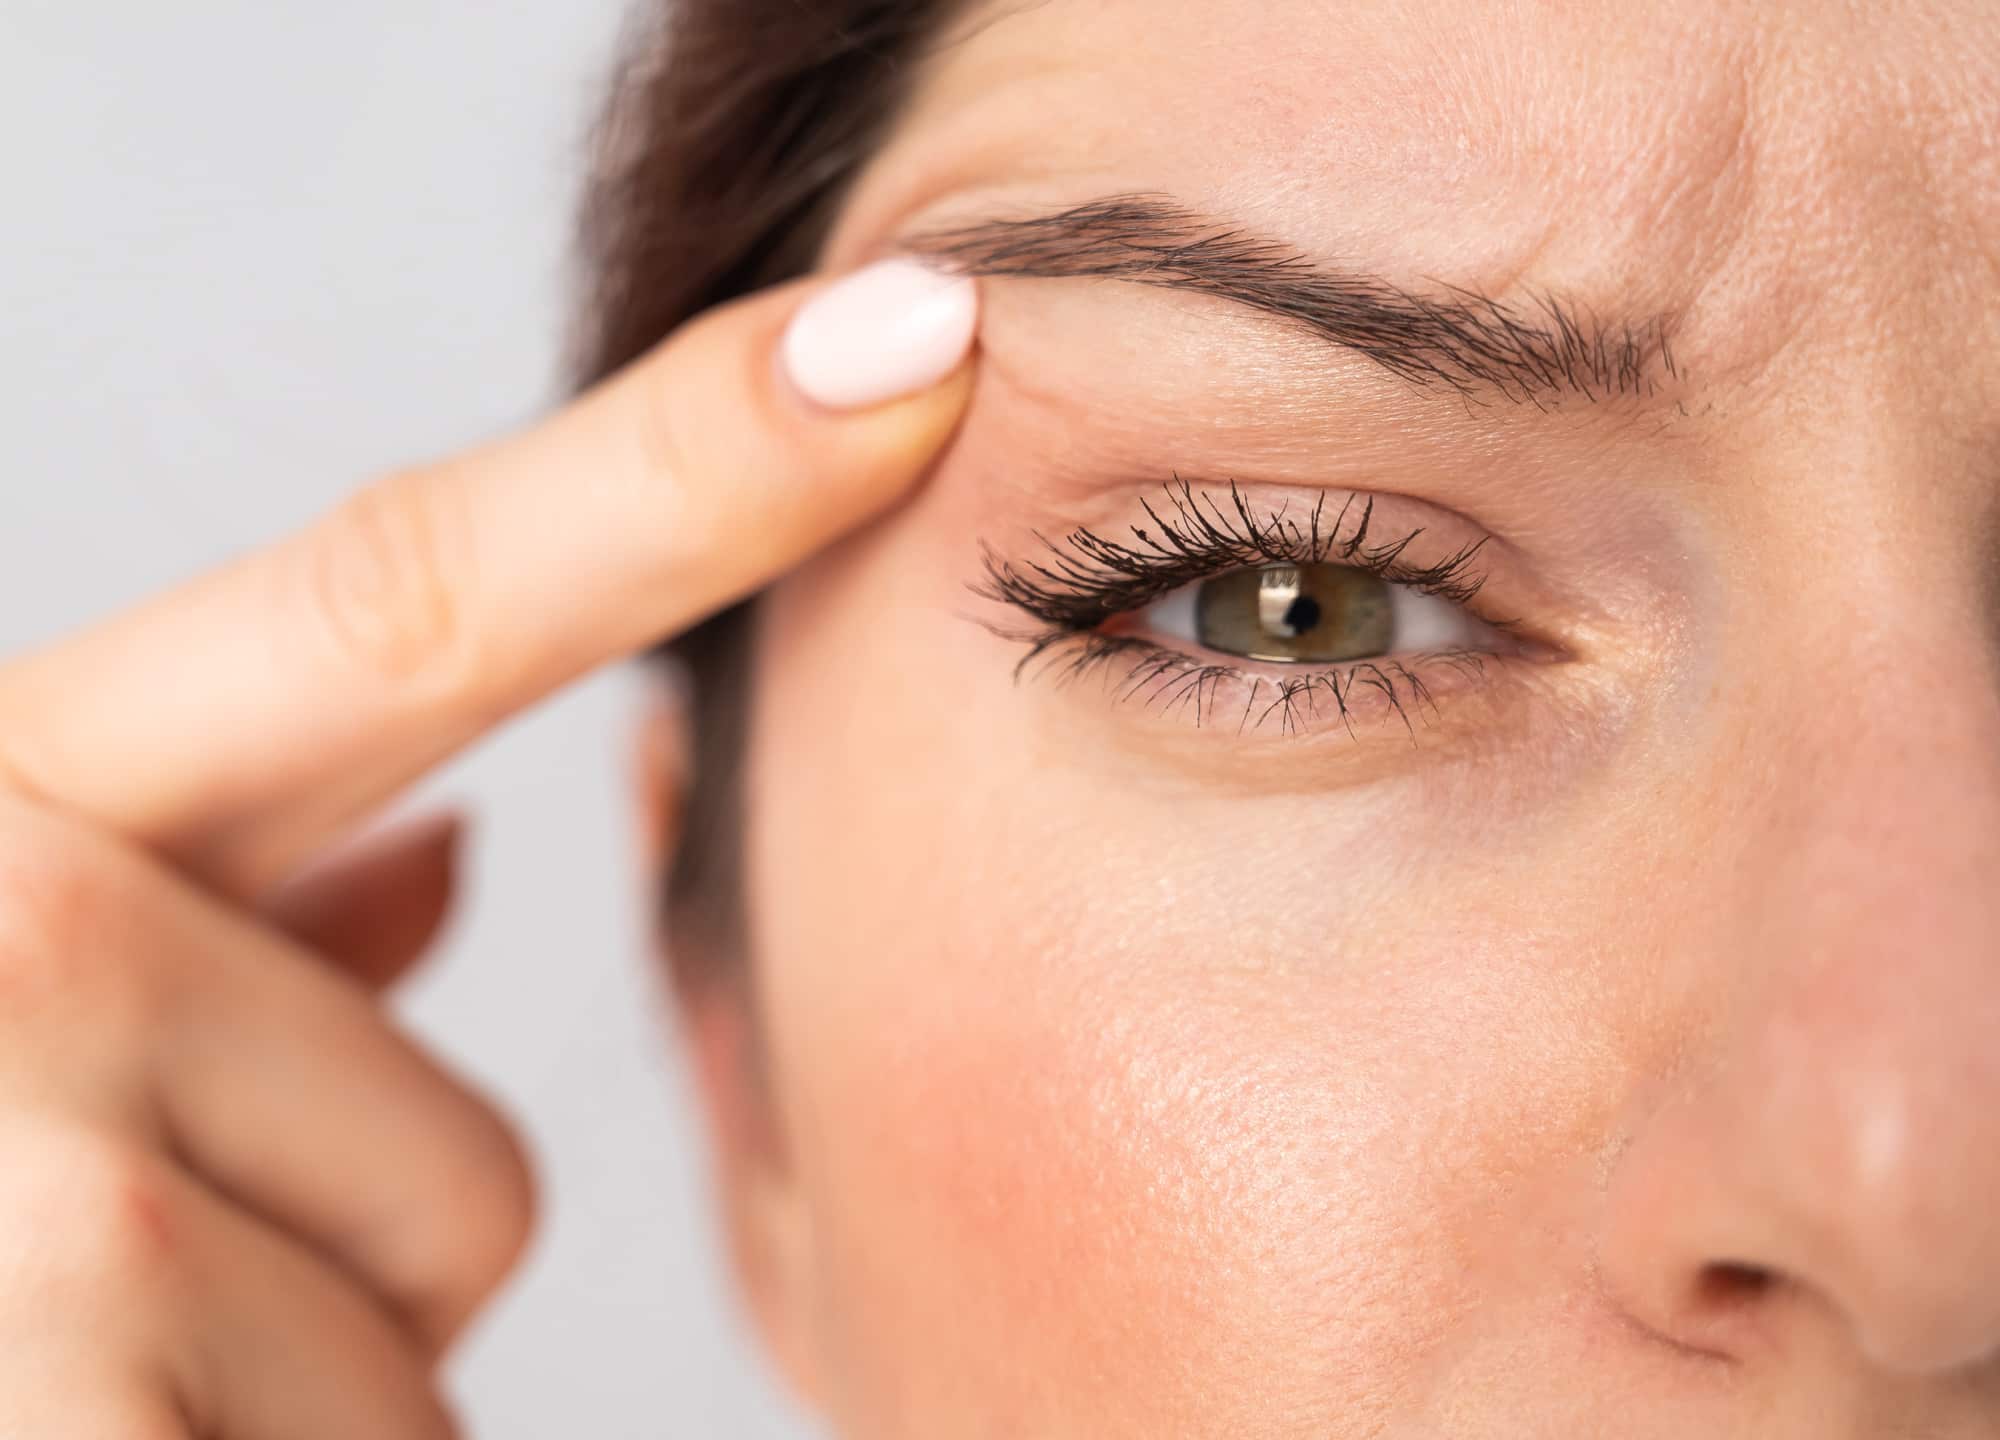 6 Things Not to Do After Eyelid Surgery - article image